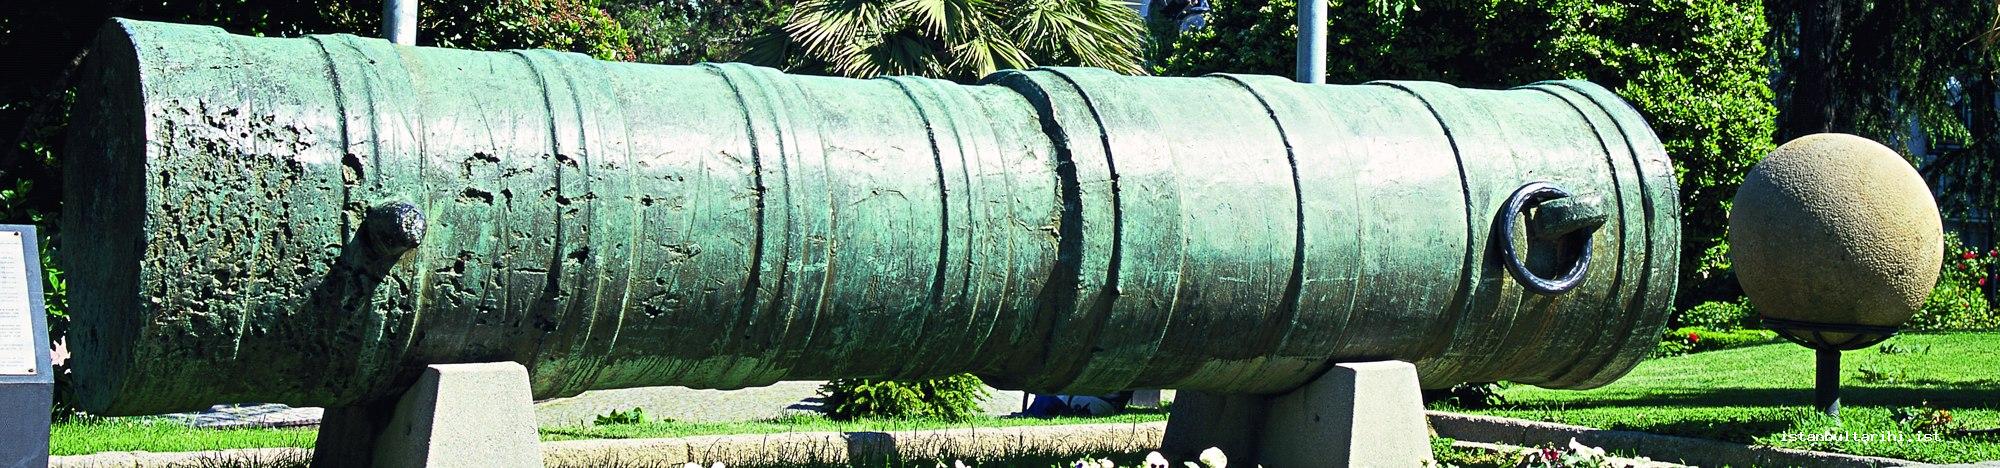 6- One of the cannons used in the siege of Istanbul and stone cannon balls (Military Museum) A